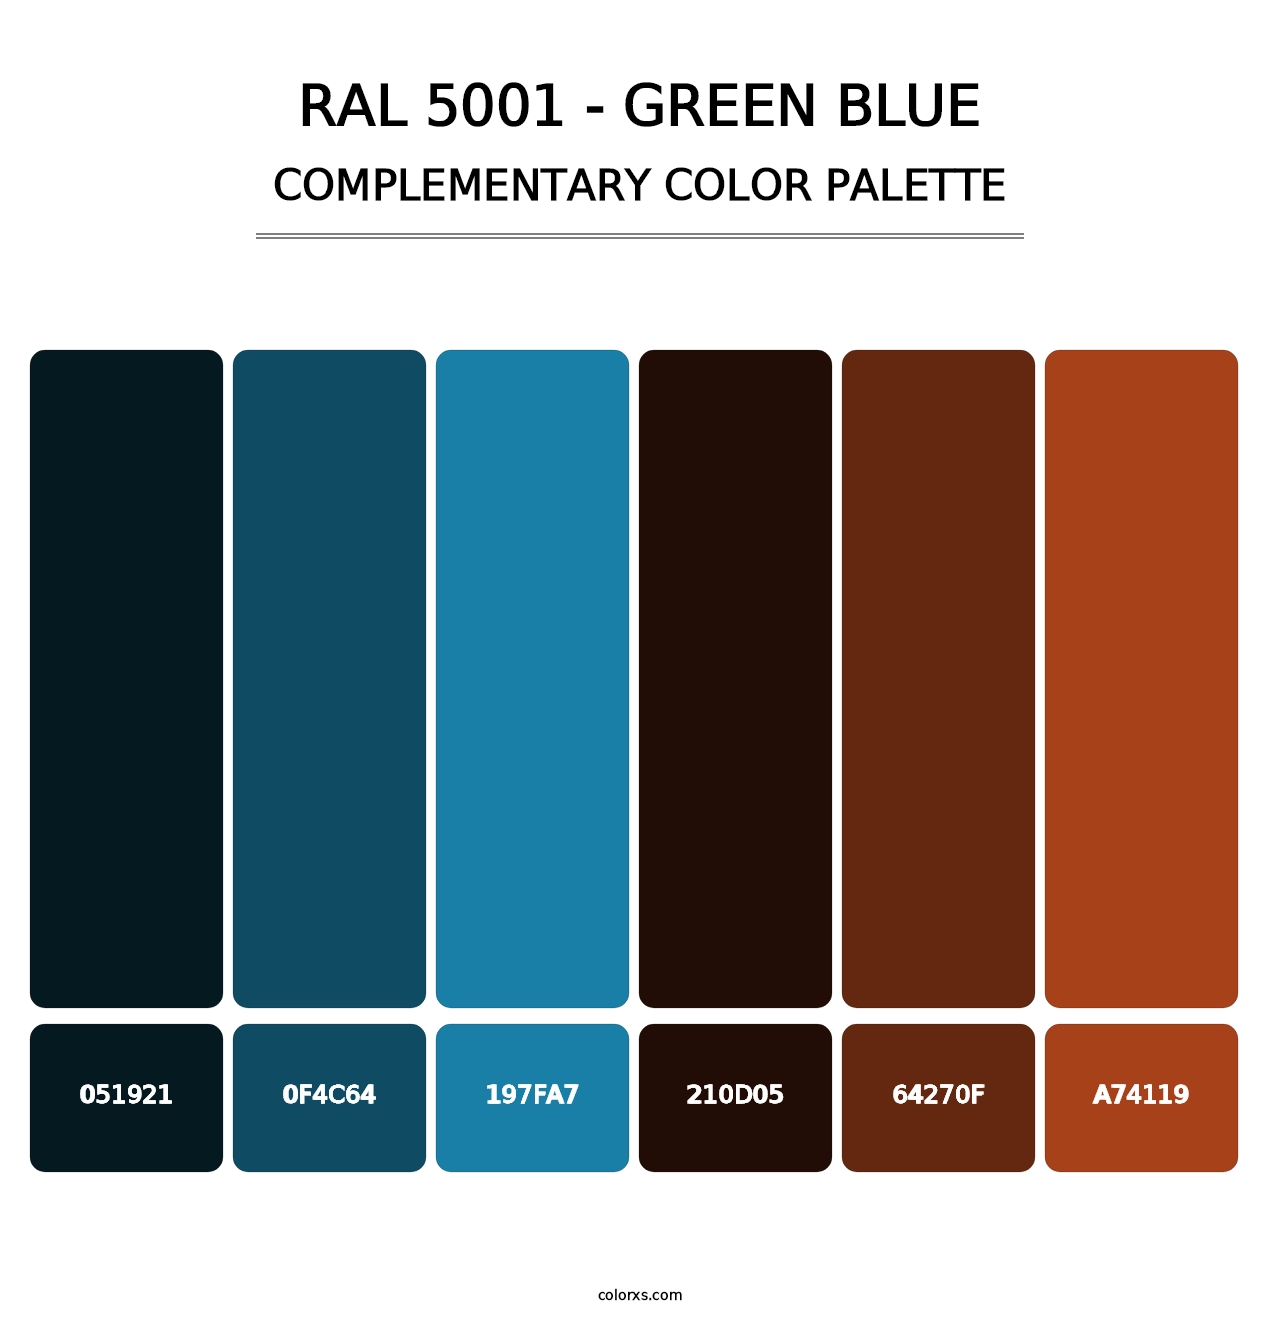 RAL 5001 - Green Blue - Complementary Color Palette